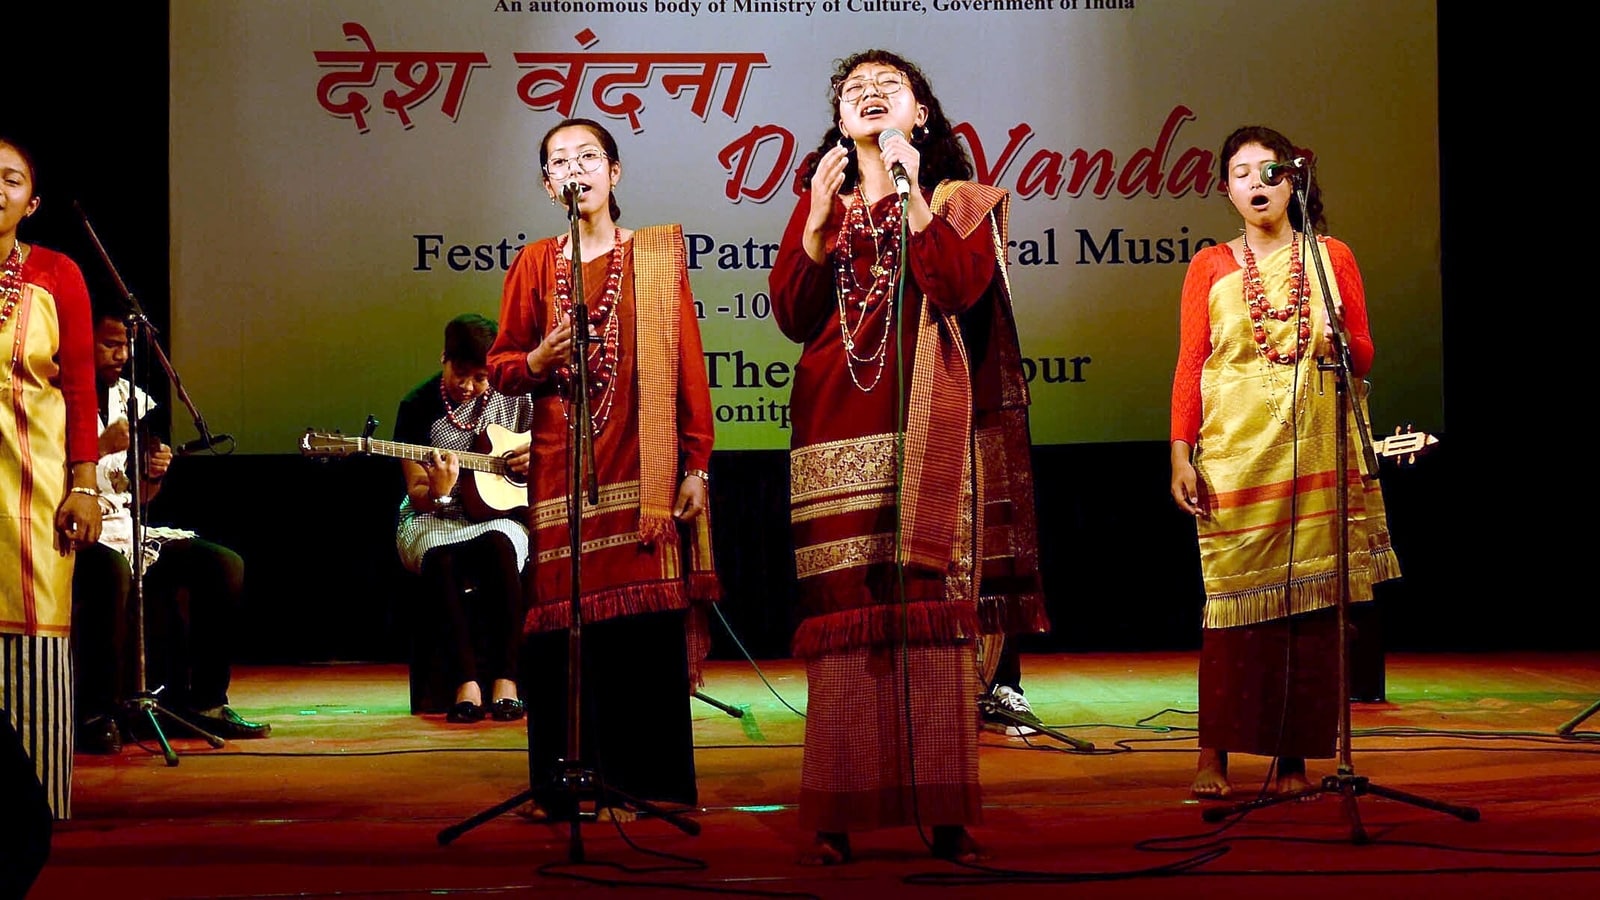 Meghalaya govt launches project to promote music, support budding artists